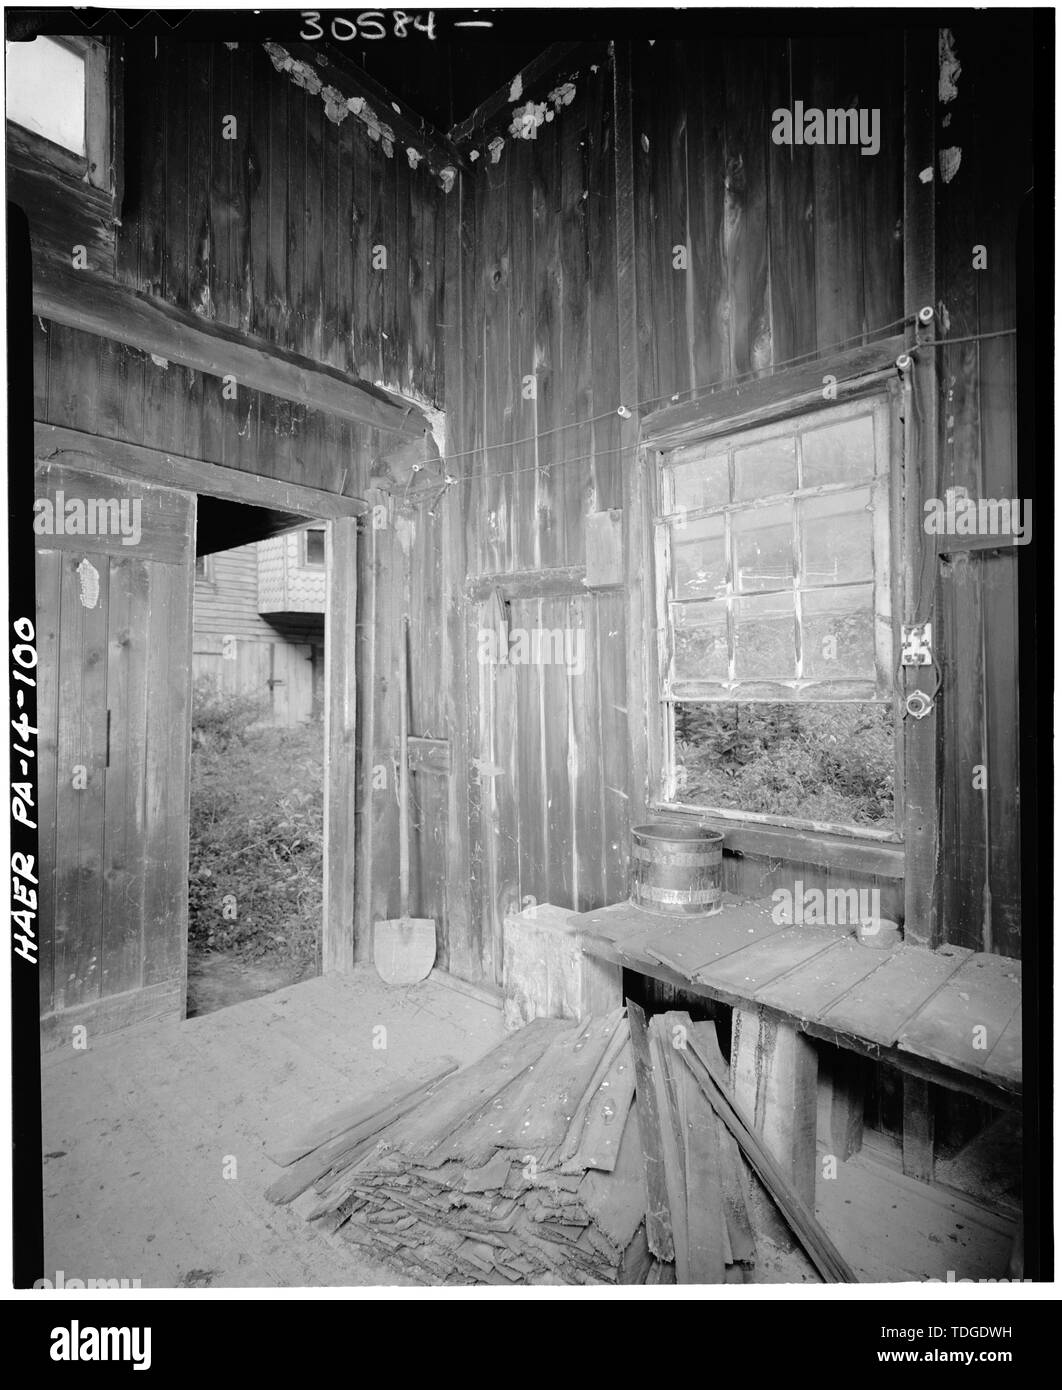 NORTHEAST CORNER OF BOILER ROOM SHOING ENTRANCE. - Gruber Wagon Works, Pennsylvania Route 183 and State Hill Road at Red Bridge Park, Bernville, Berks County, PA Stock Photo